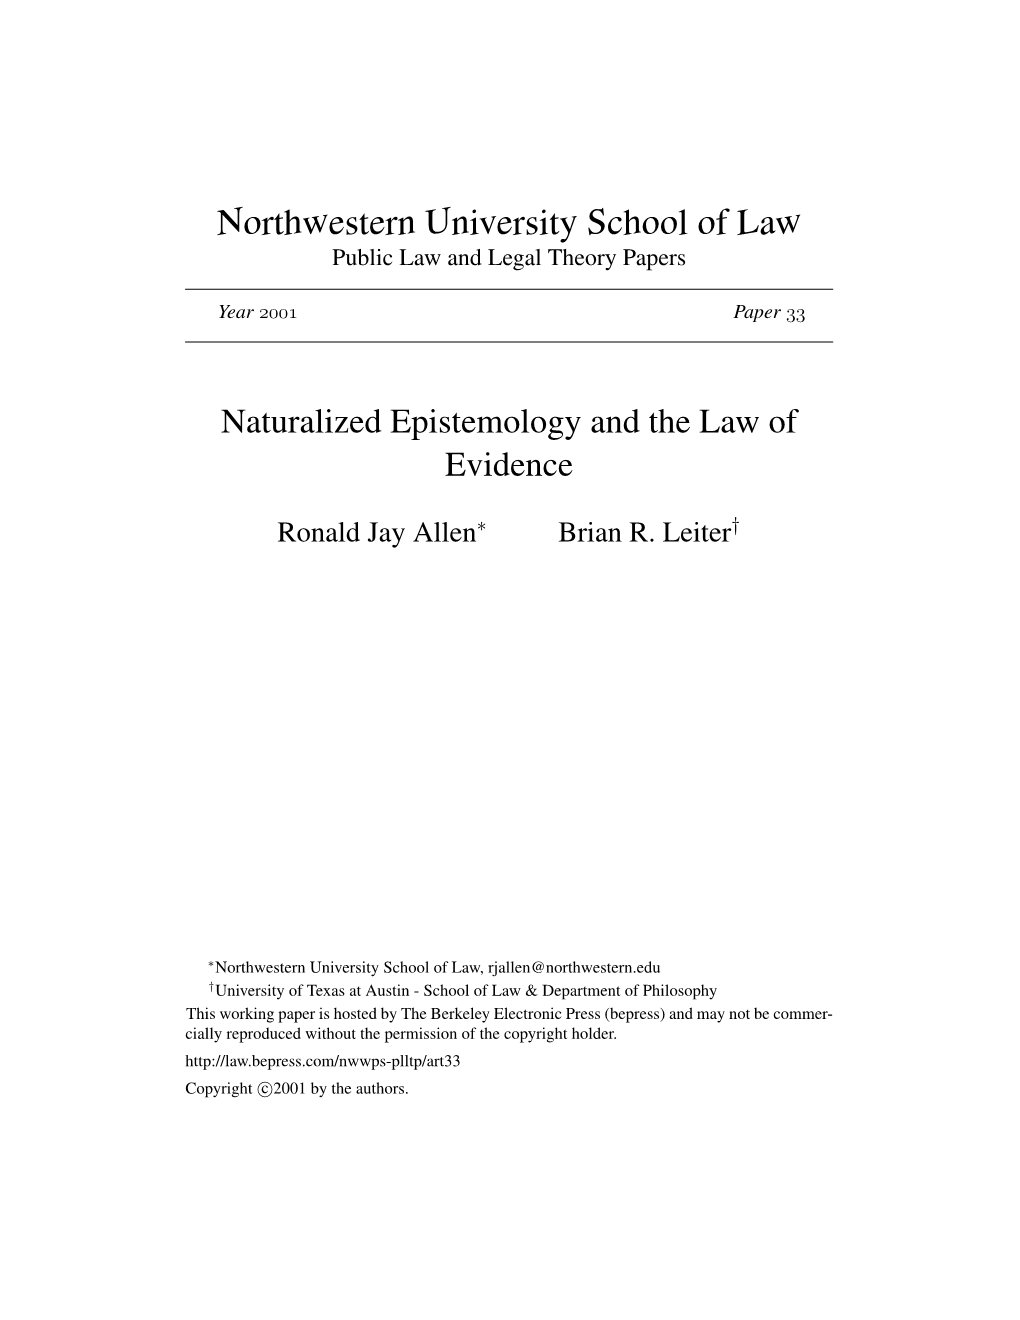 Naturalized Epistemology and the Law of Evidence